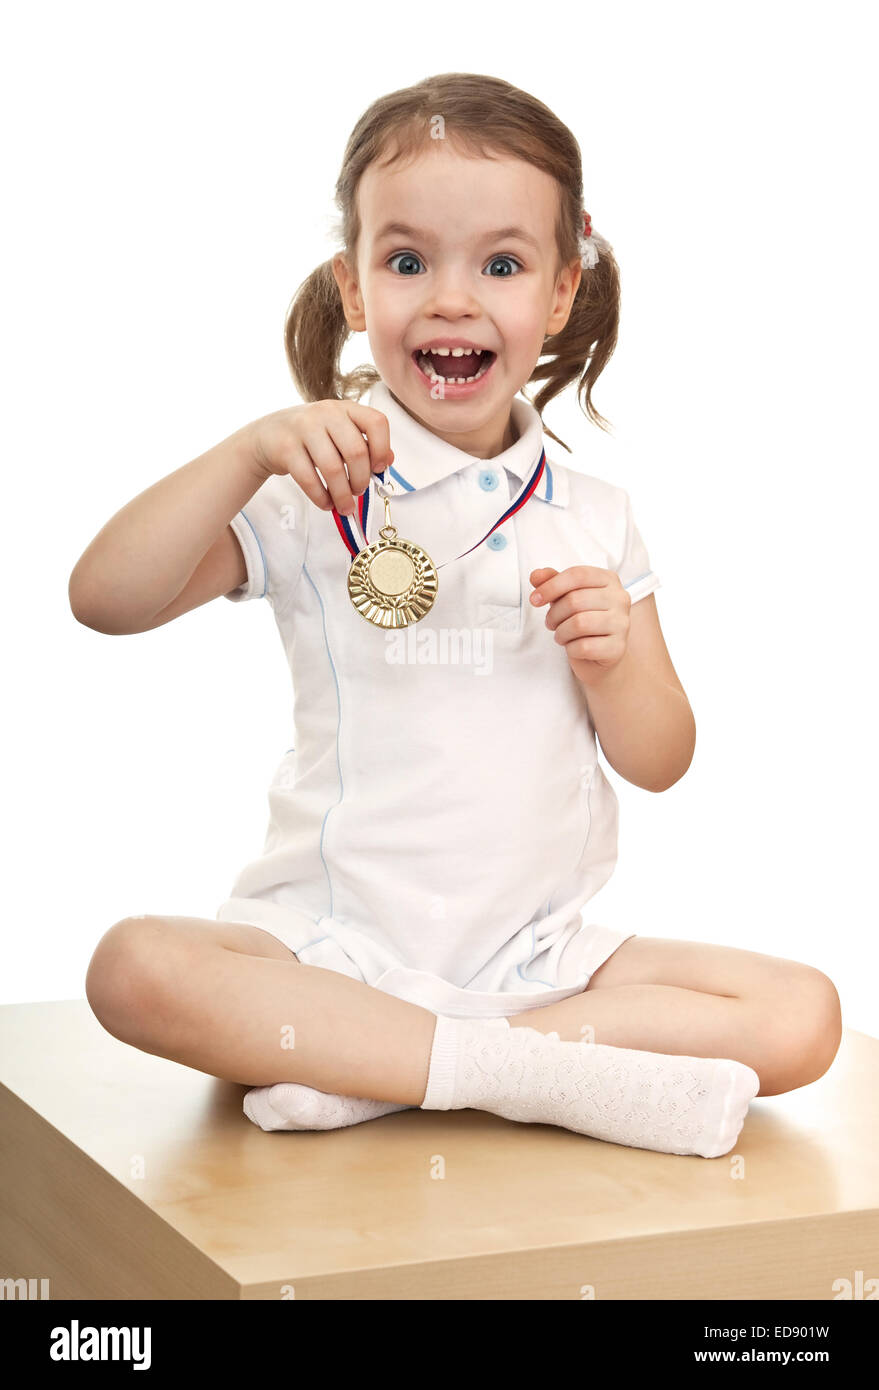 girl with a gold medal Stock Photo